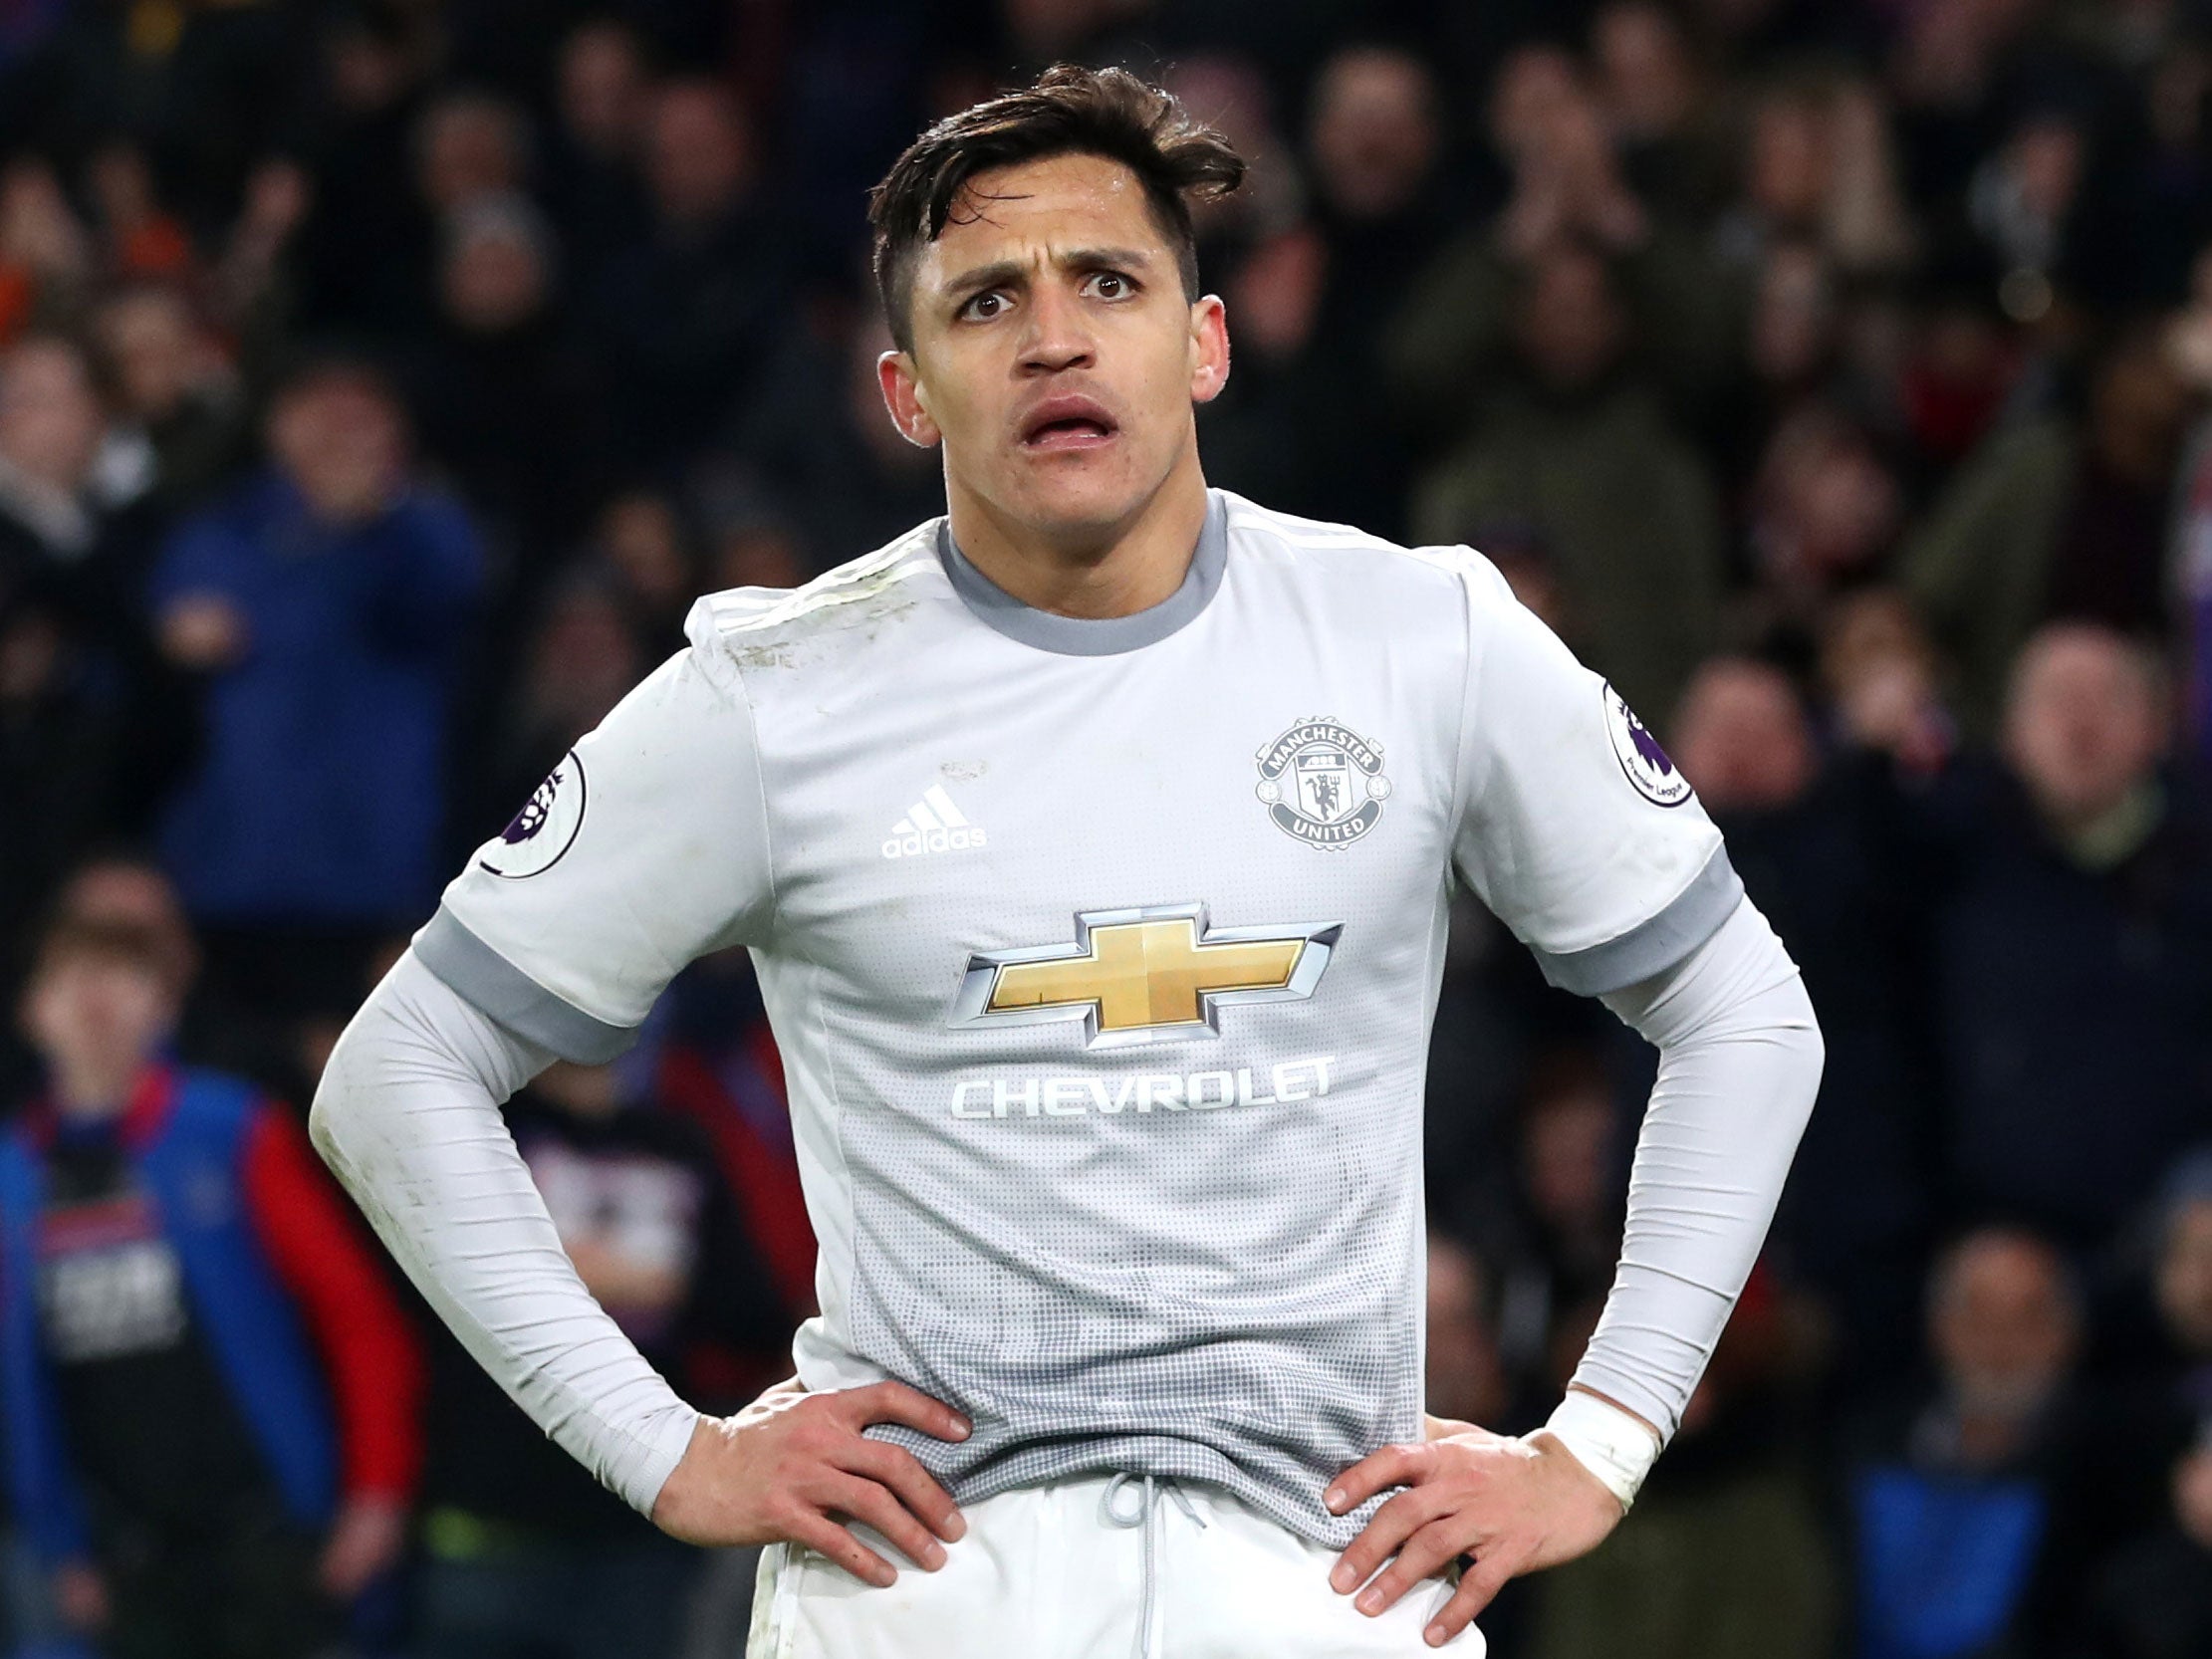 Alexis Sanchez has scored just once in eight Manchester United appearances